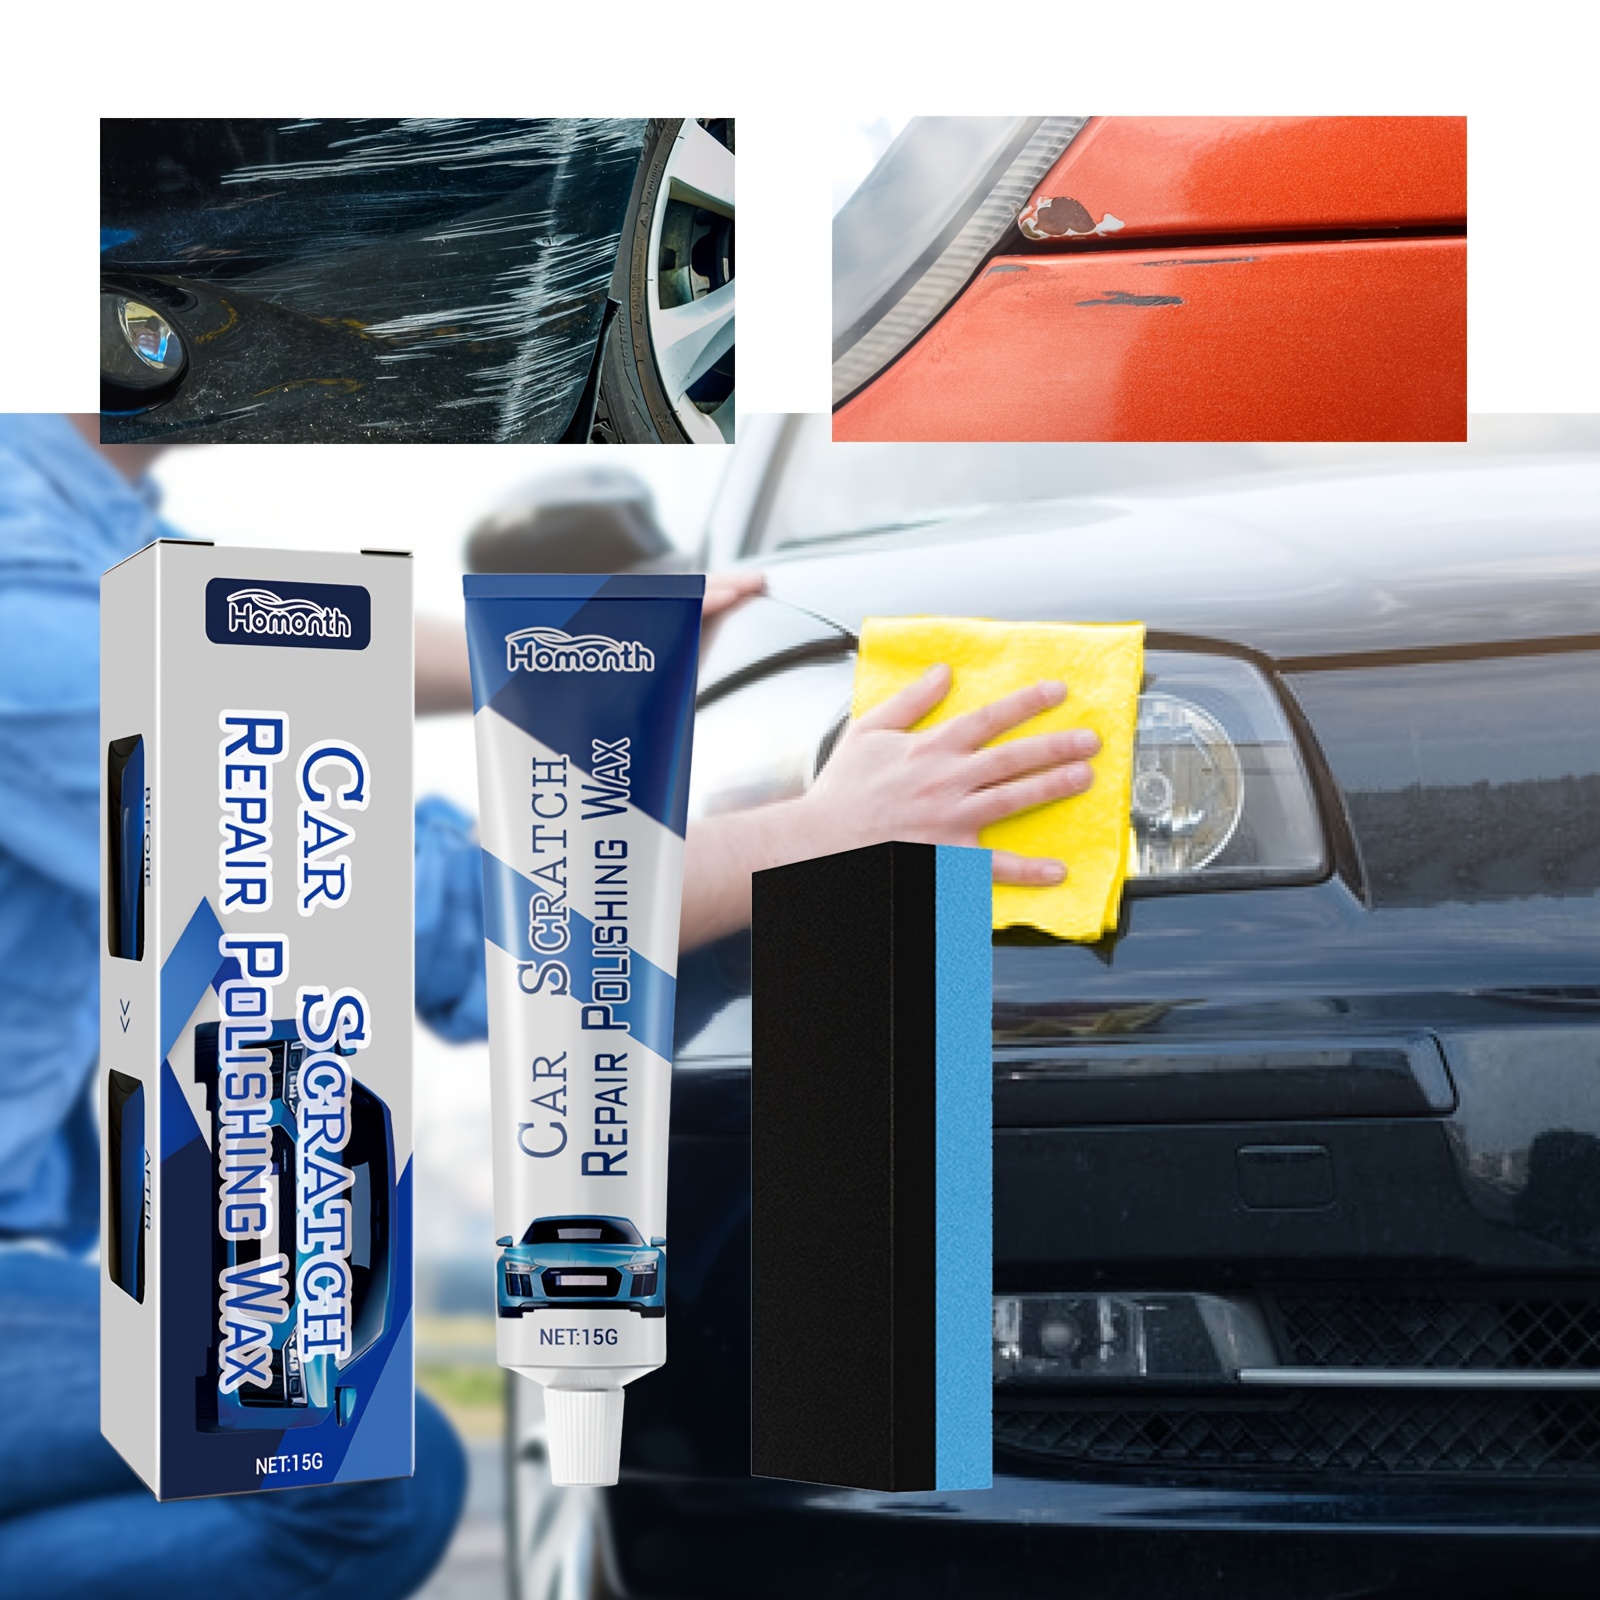 Luxe Auto Car Scratch Remover – Luxe auto